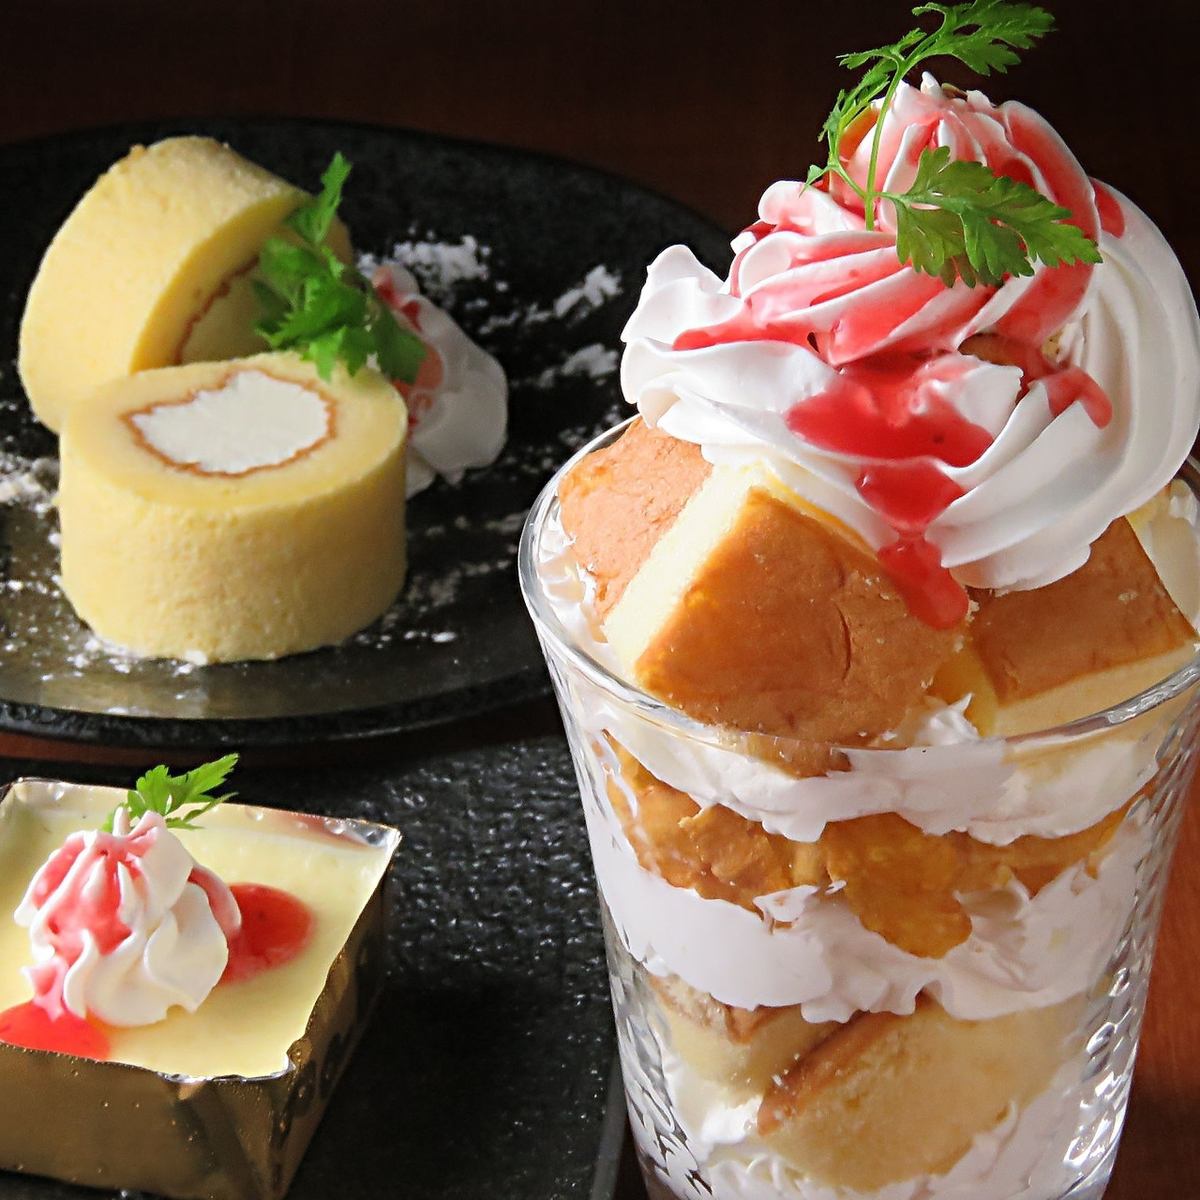 A new dessert is also available! Cost performance ◎All-you-can-eat yakiniku for women starting at 3,168 JPY